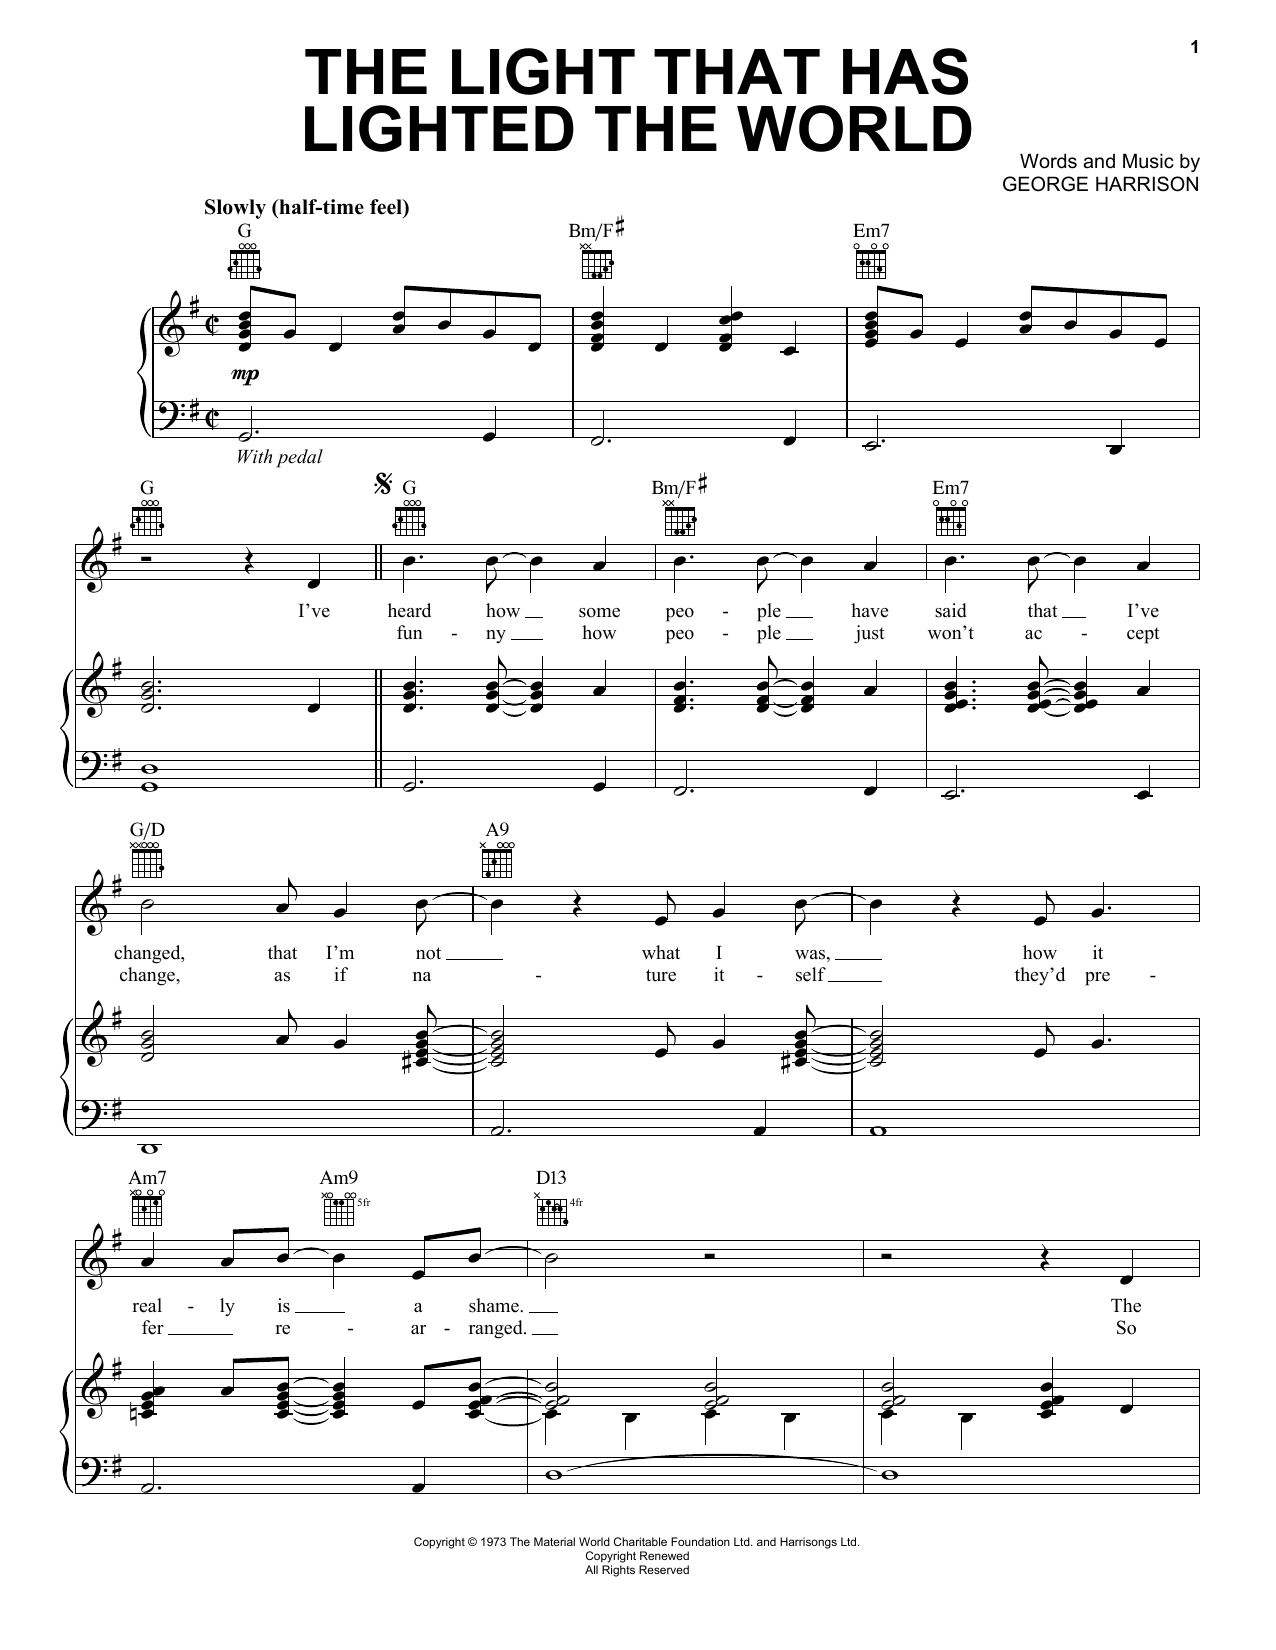 Download George Harrison The Light That Has Lighted The World Sheet Music